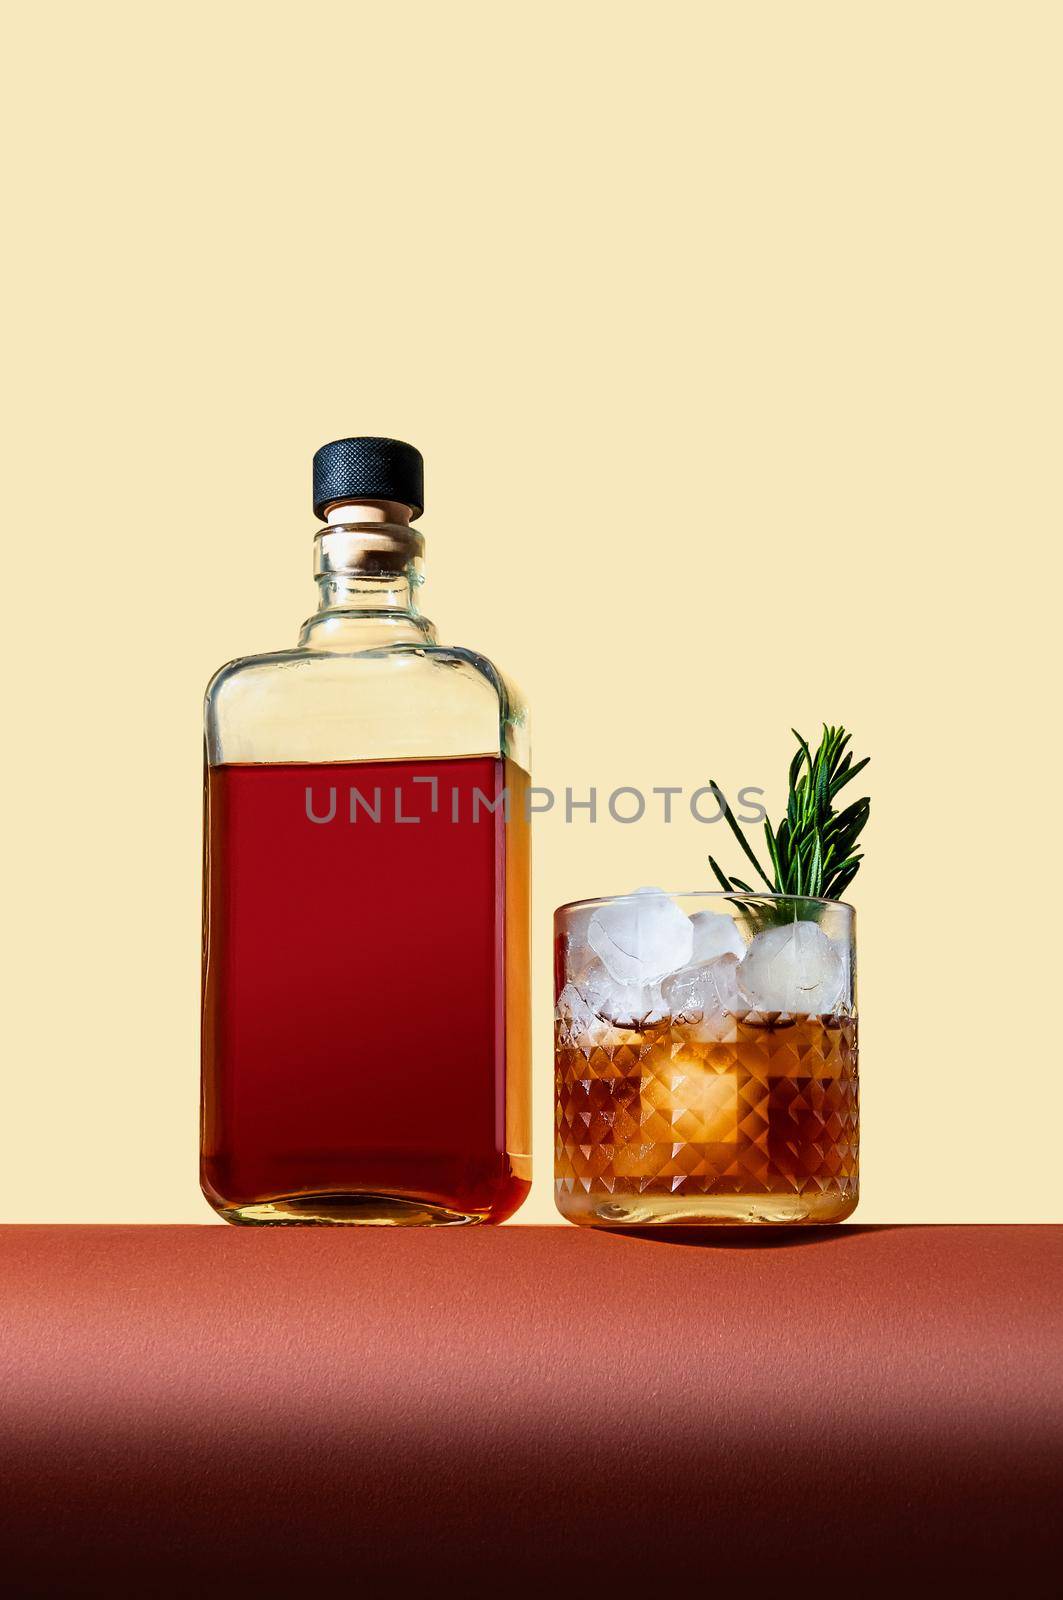 Bottle and Glass with Whiskey and Ice on Brown Table on Light Background. Modern Style. Creative Concept.